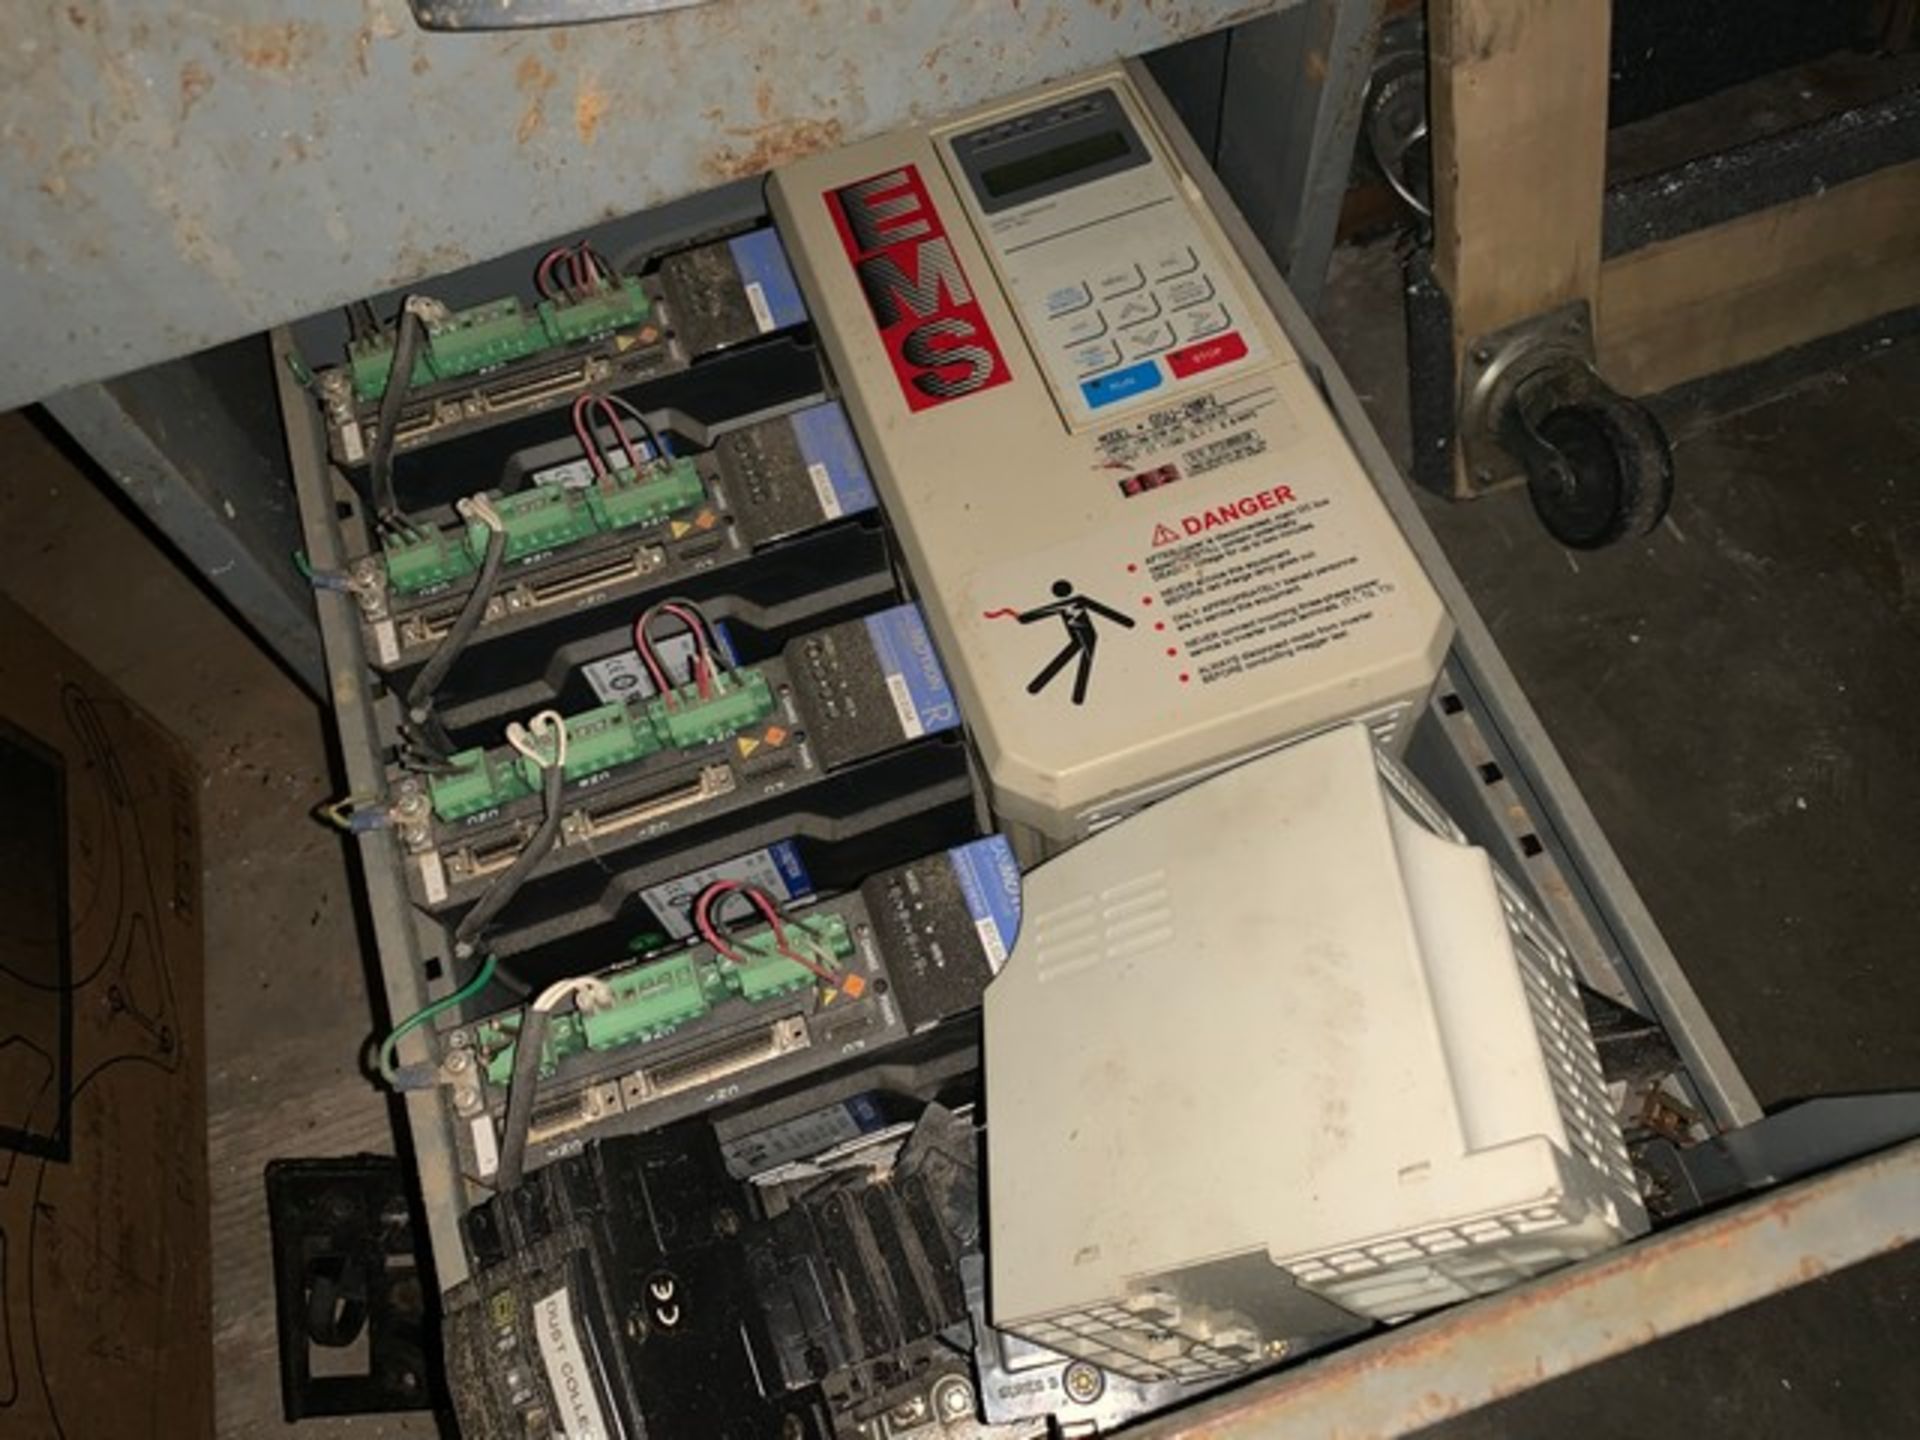 LOT FILE CABINET & INDEX FILE WITH WRENCHES, RELAYS, ELECTRICAL COMPONENTS, ETC - Image 3 of 3